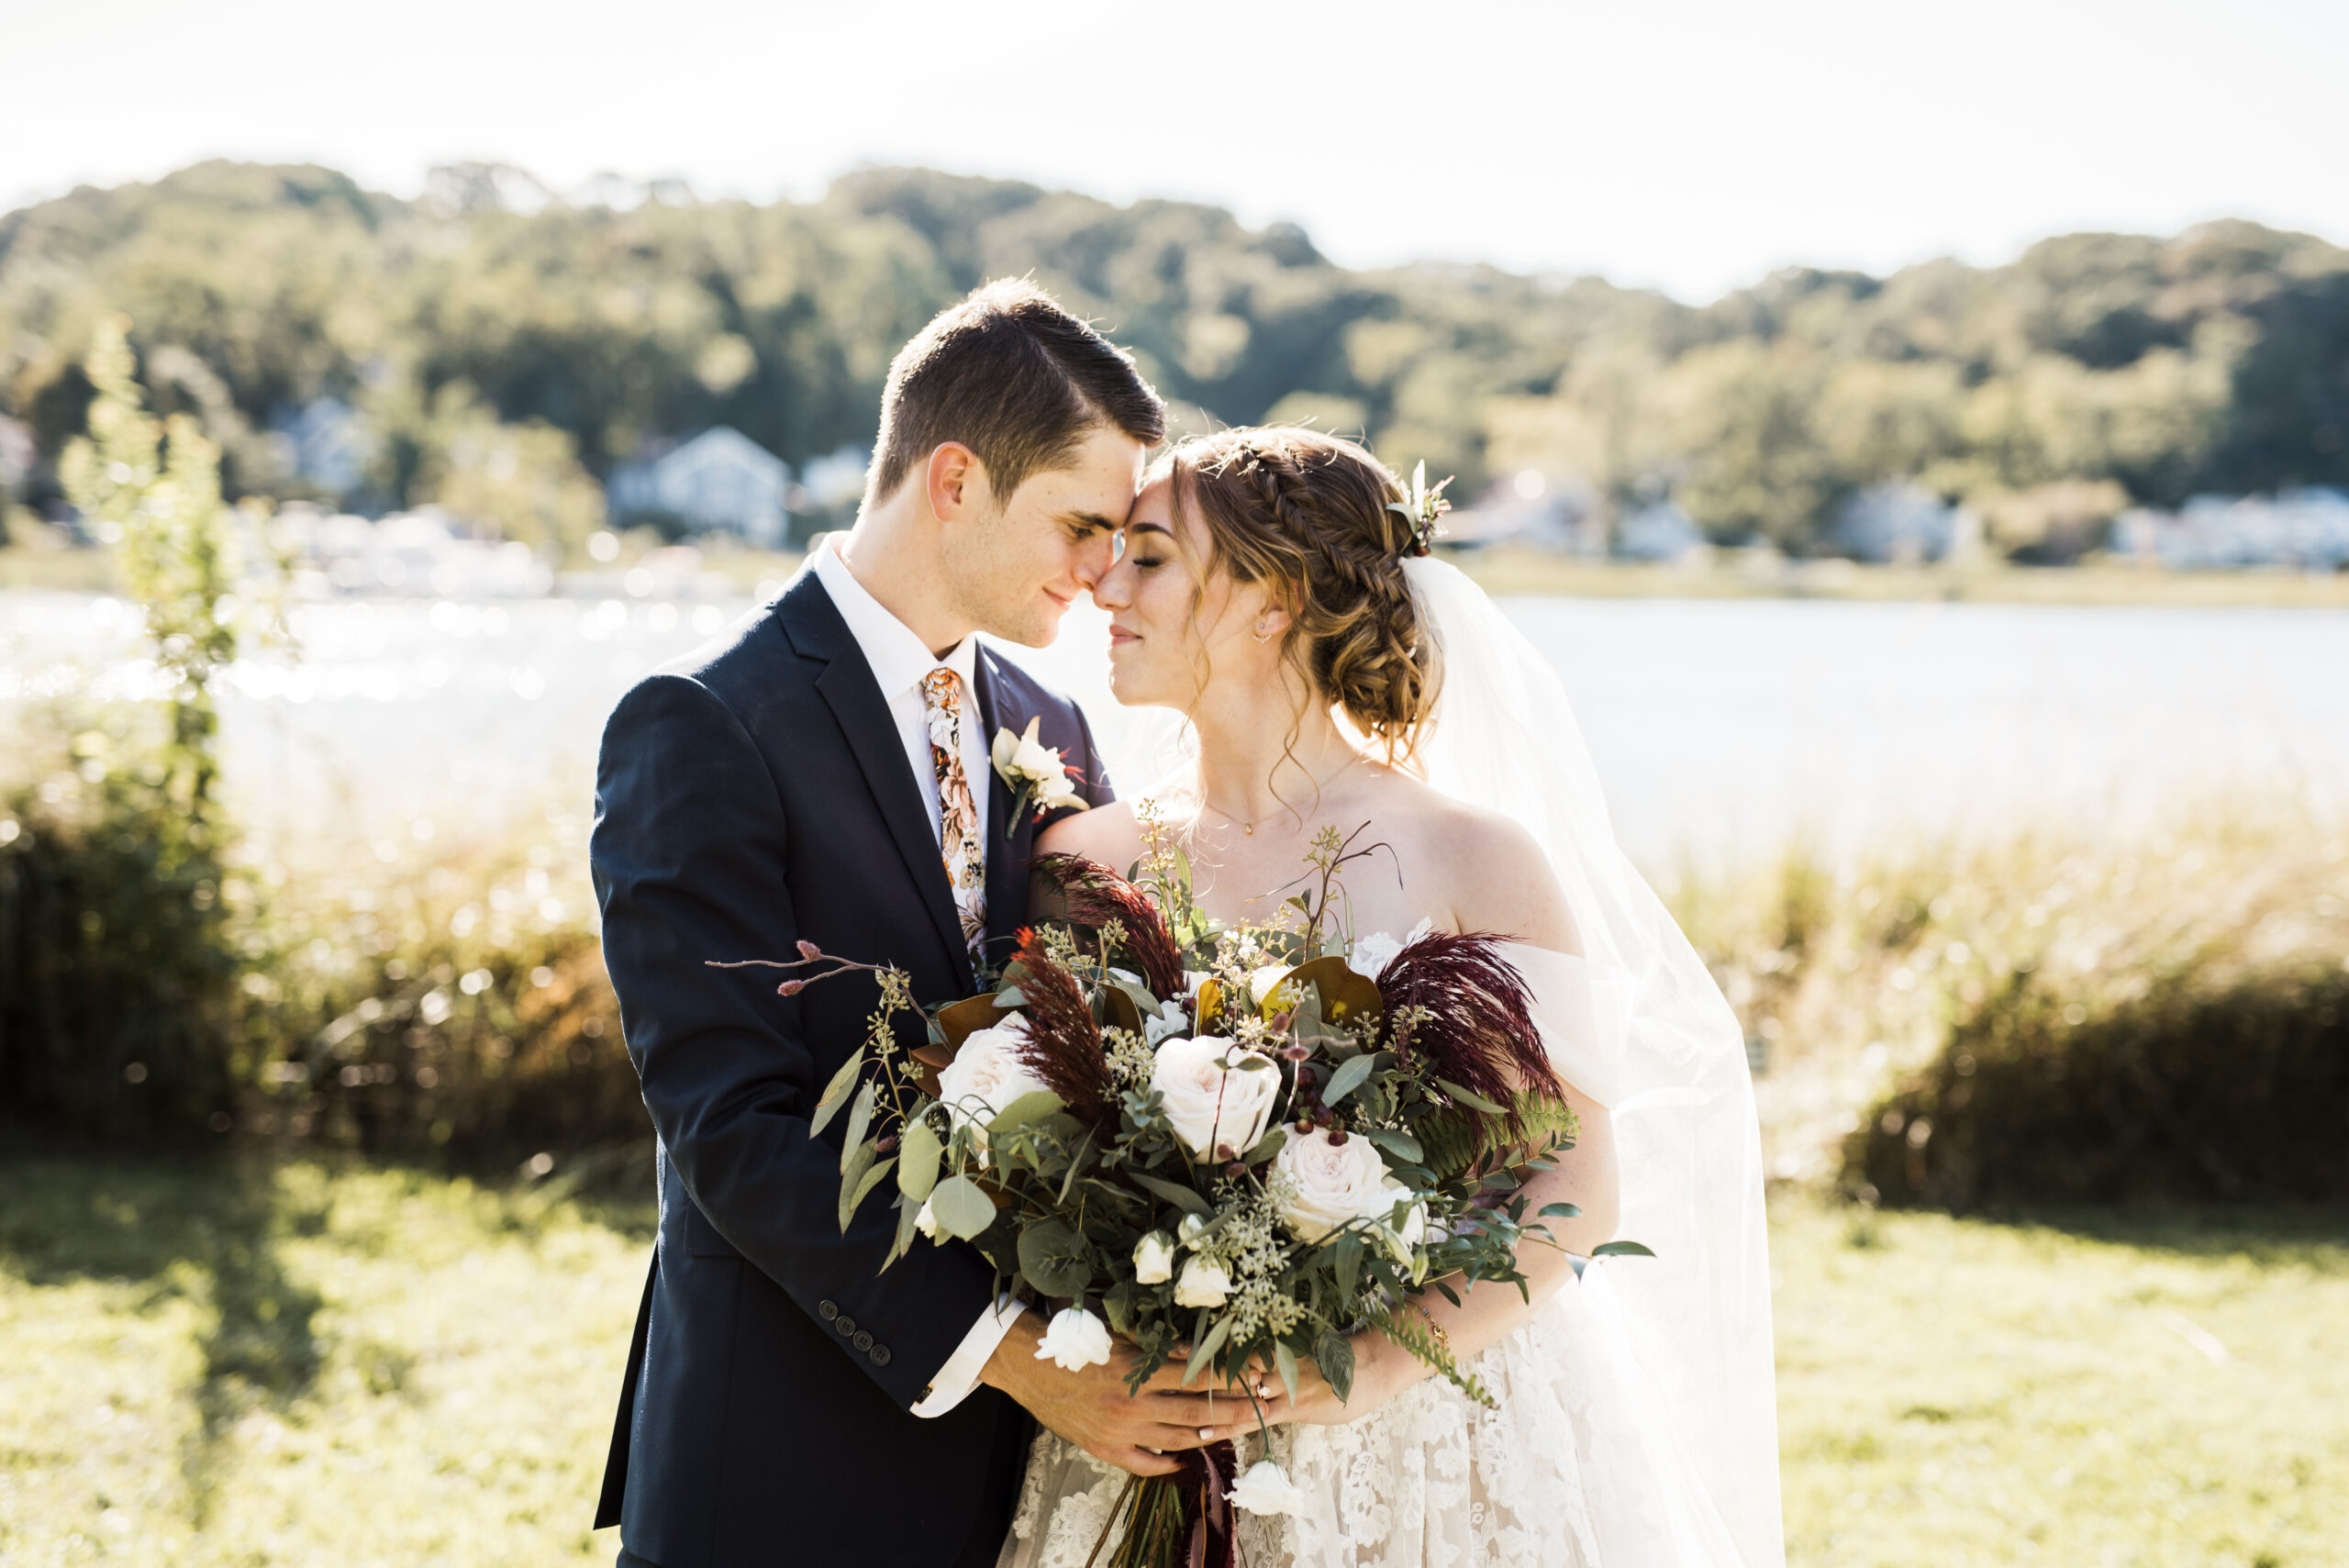 Relaxed and Intimate Celebration At A Private Beach in New York Wedding | Brooklyn Bride